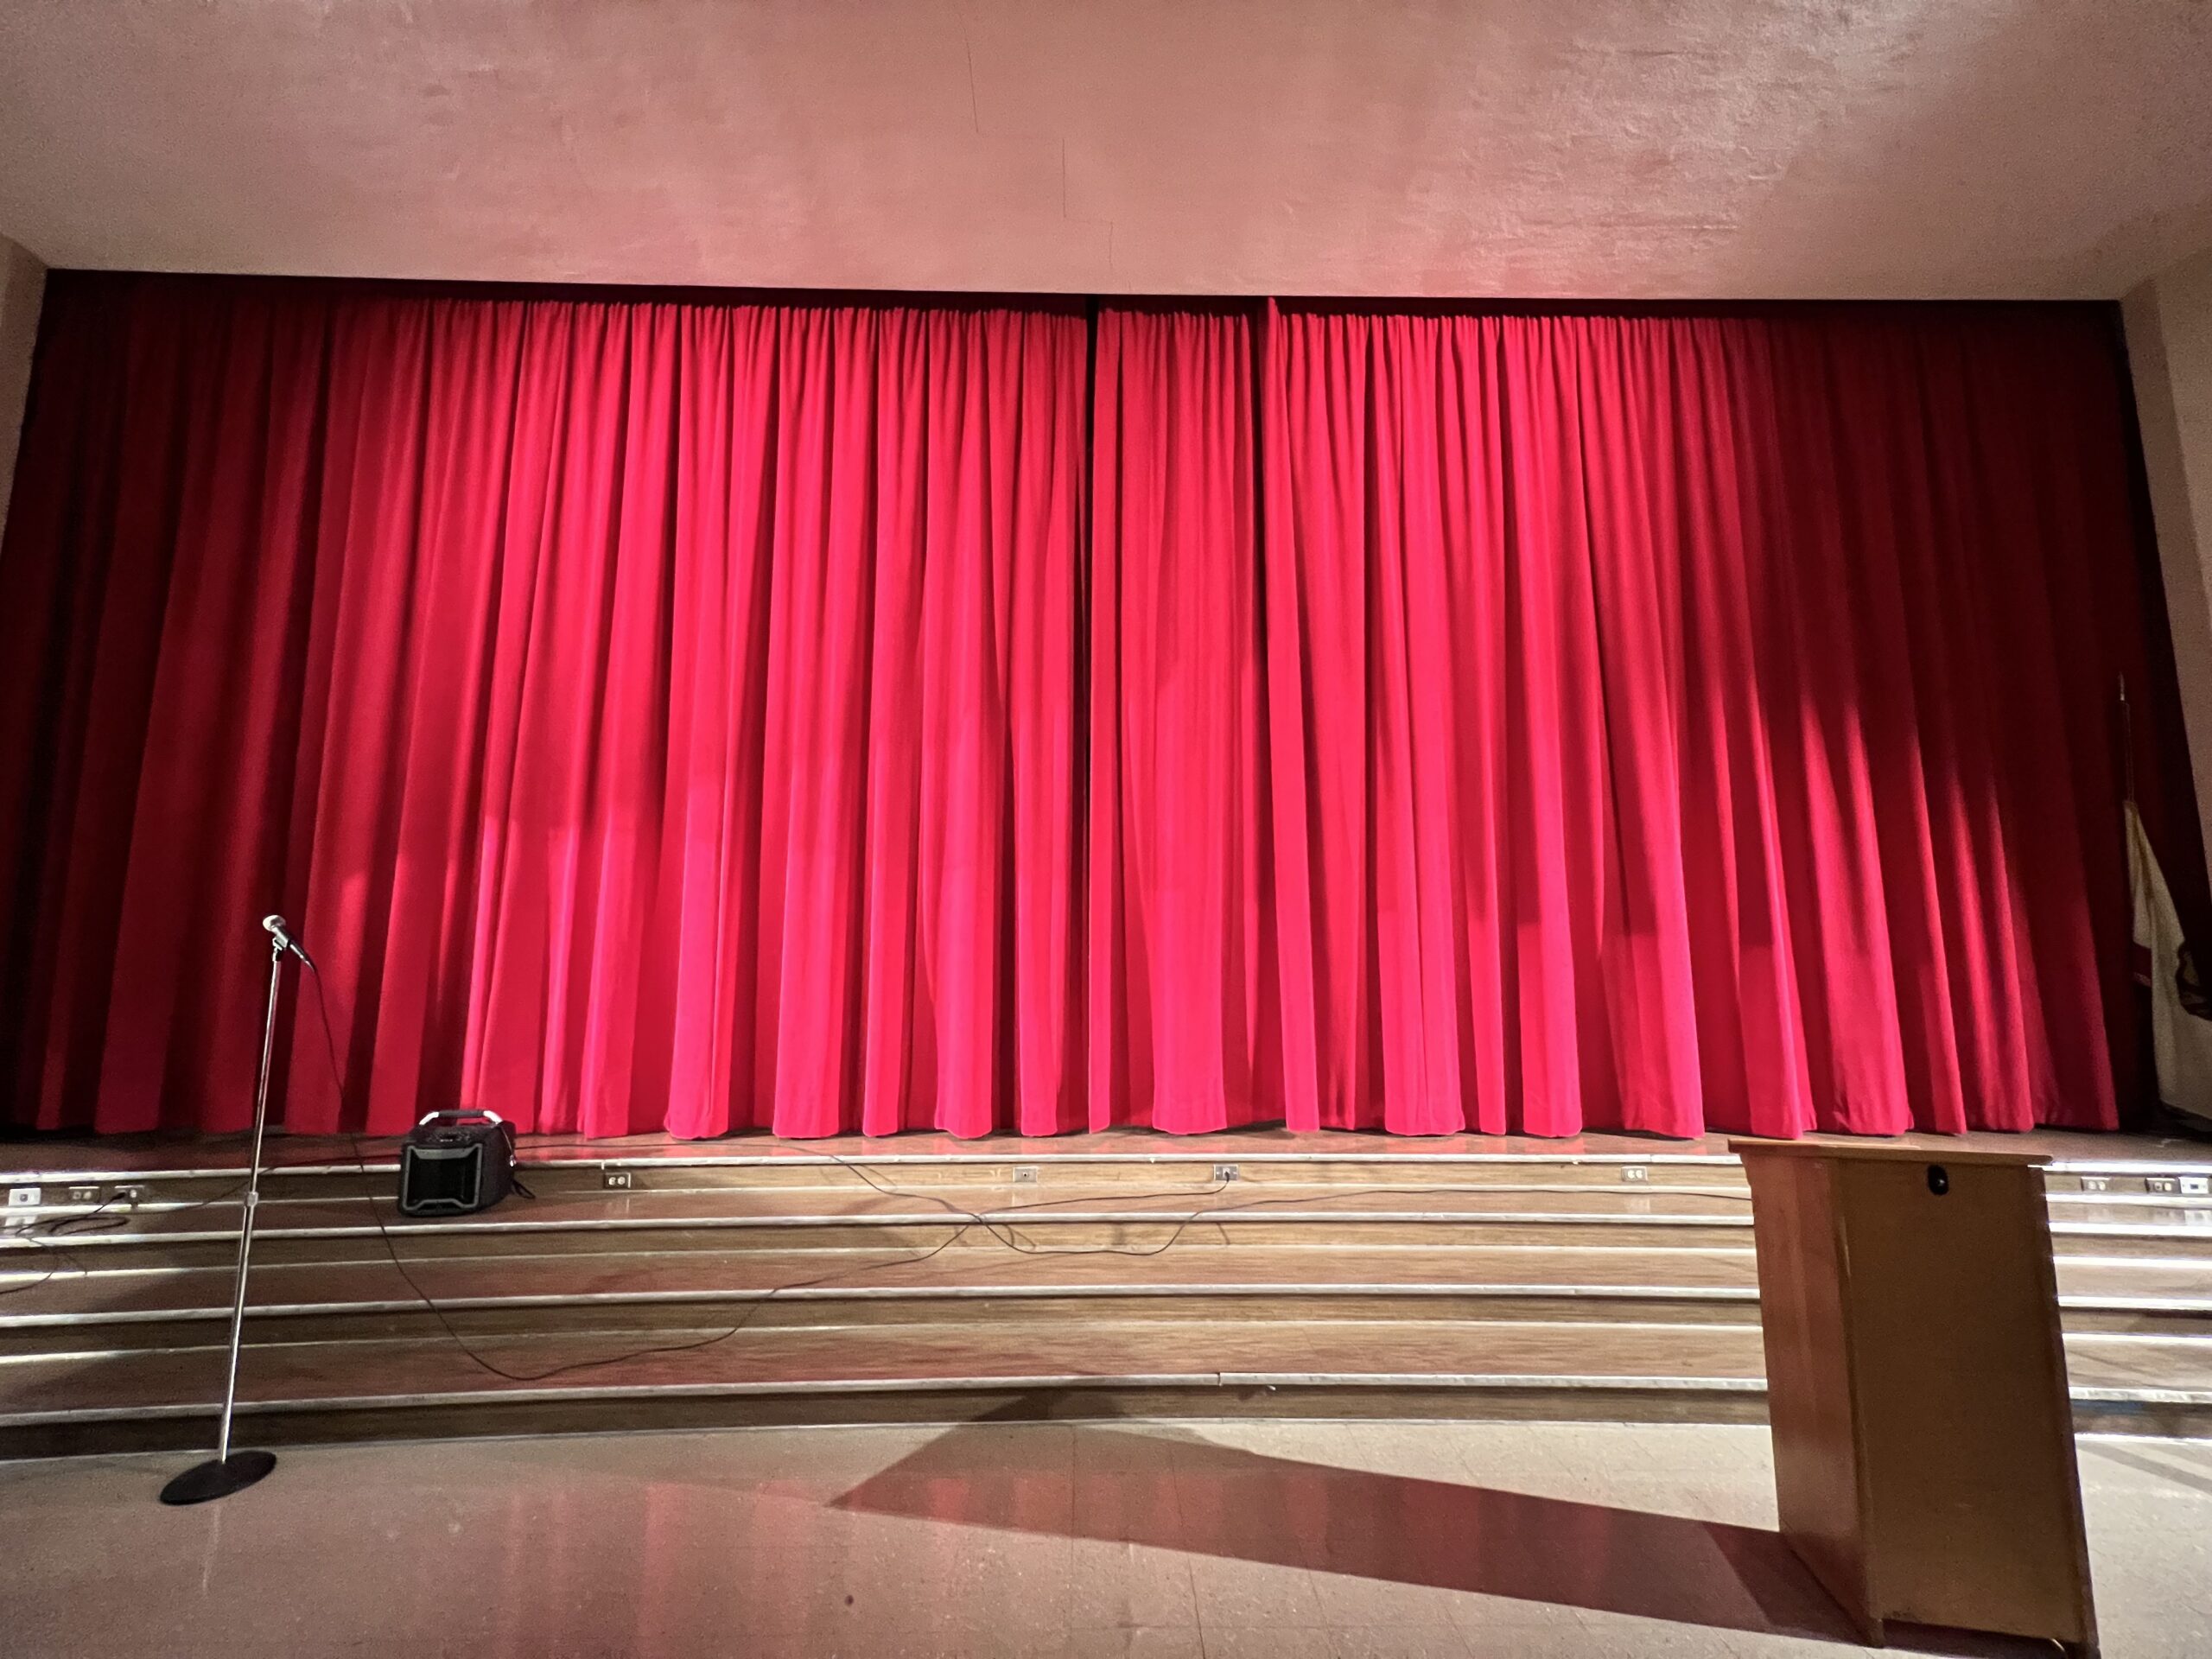 A stage with a microphone stand and red curtains